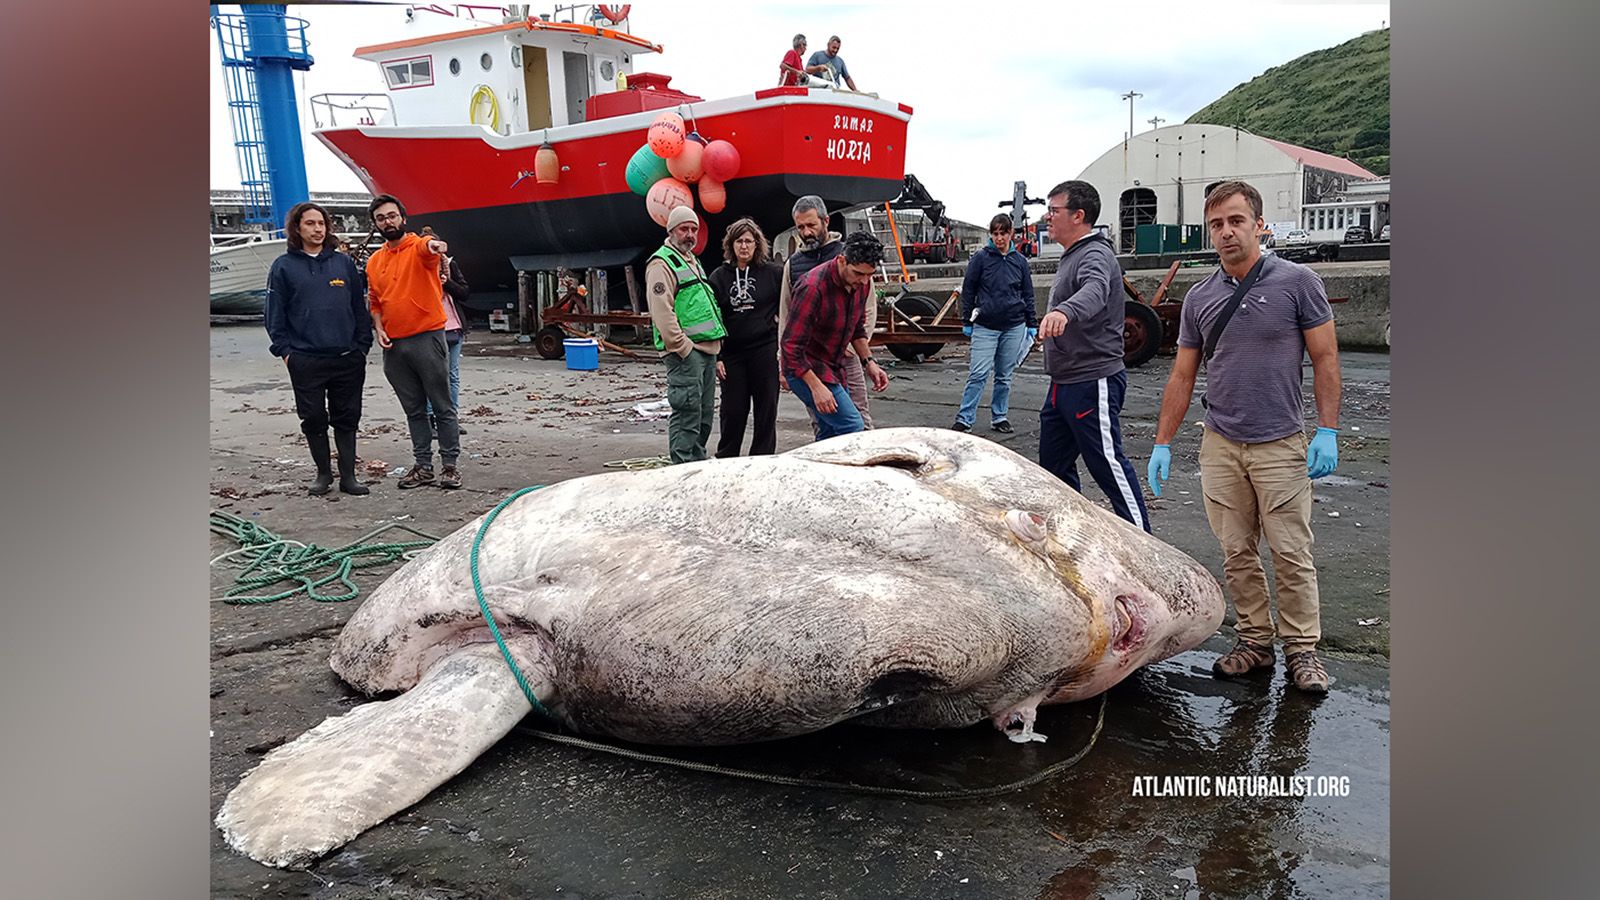 Sunfish believed to be record-breaking bony fish weighing 3 tons found